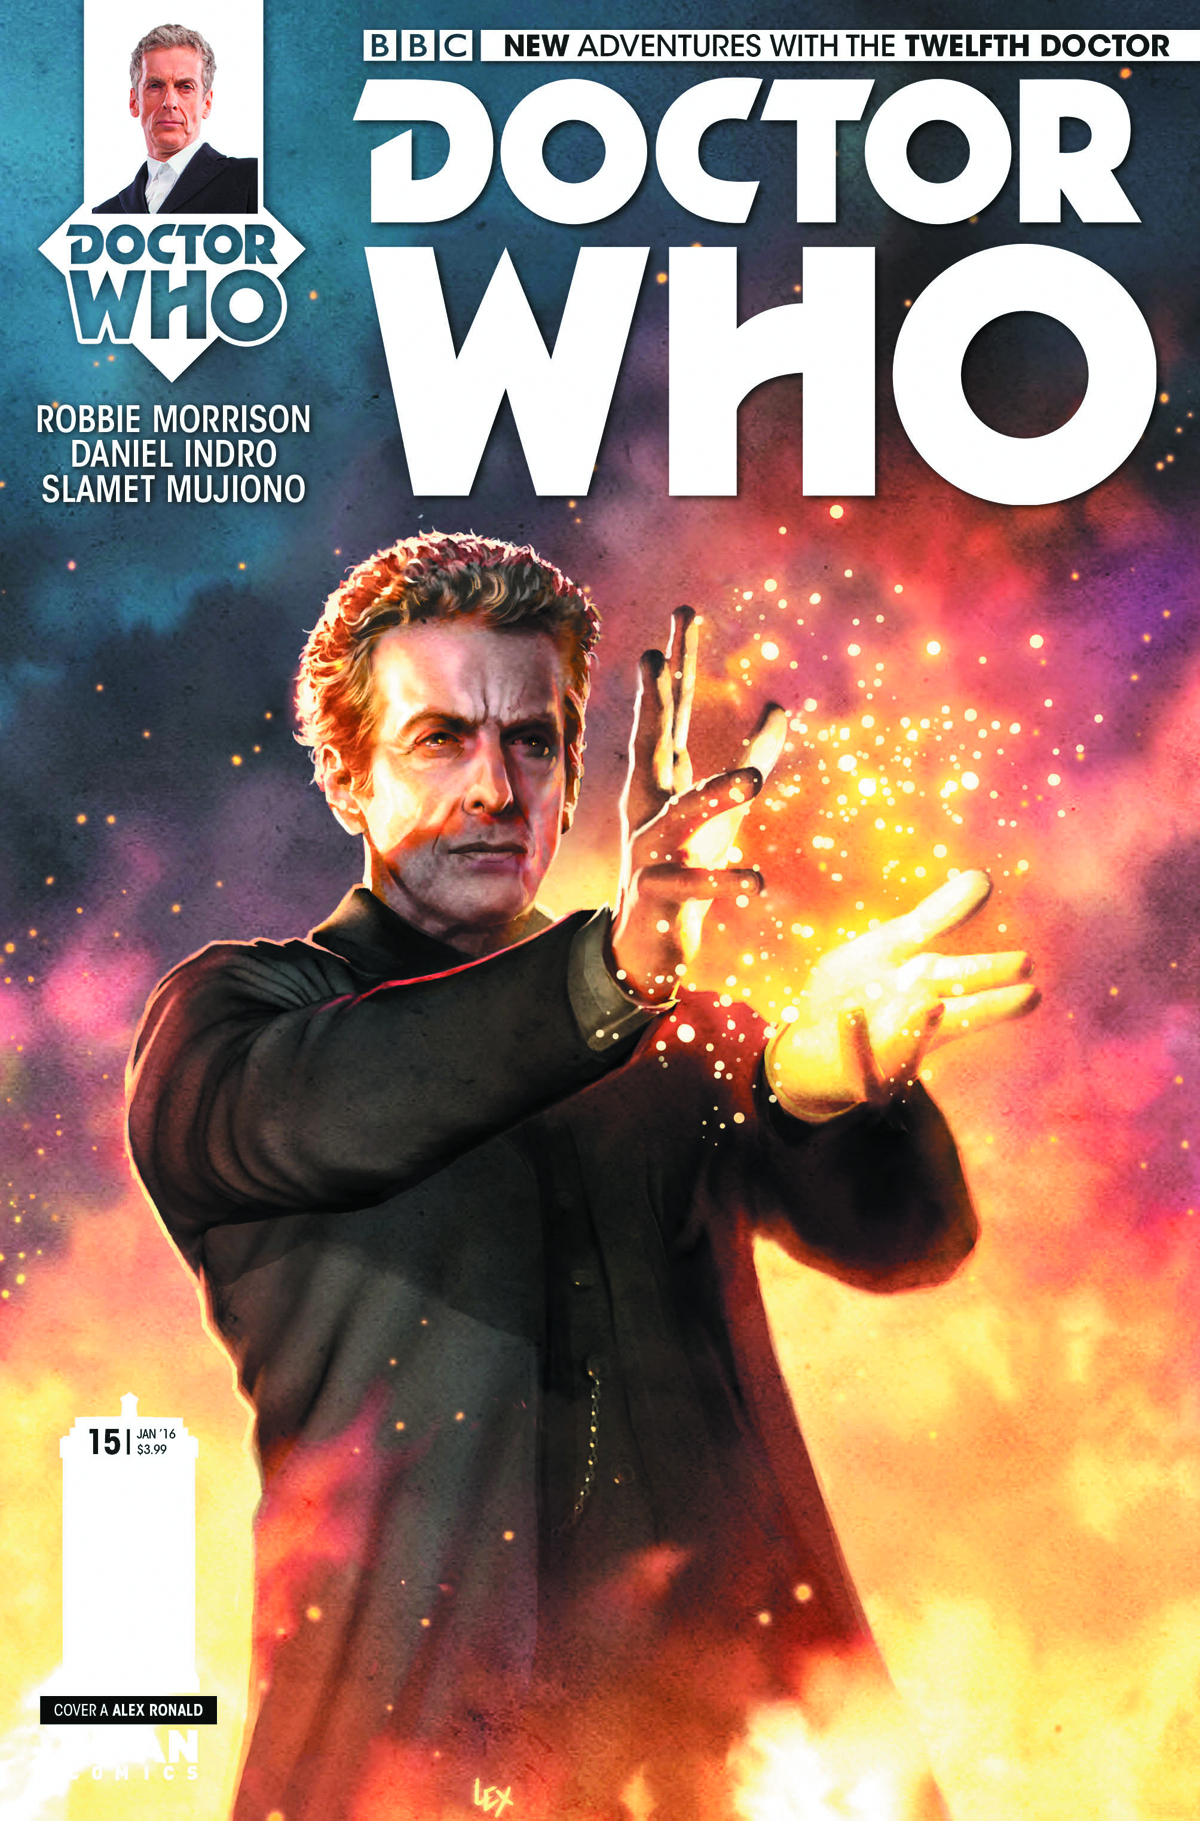 DOCTOR WHO 12TH #15 REG RONALD